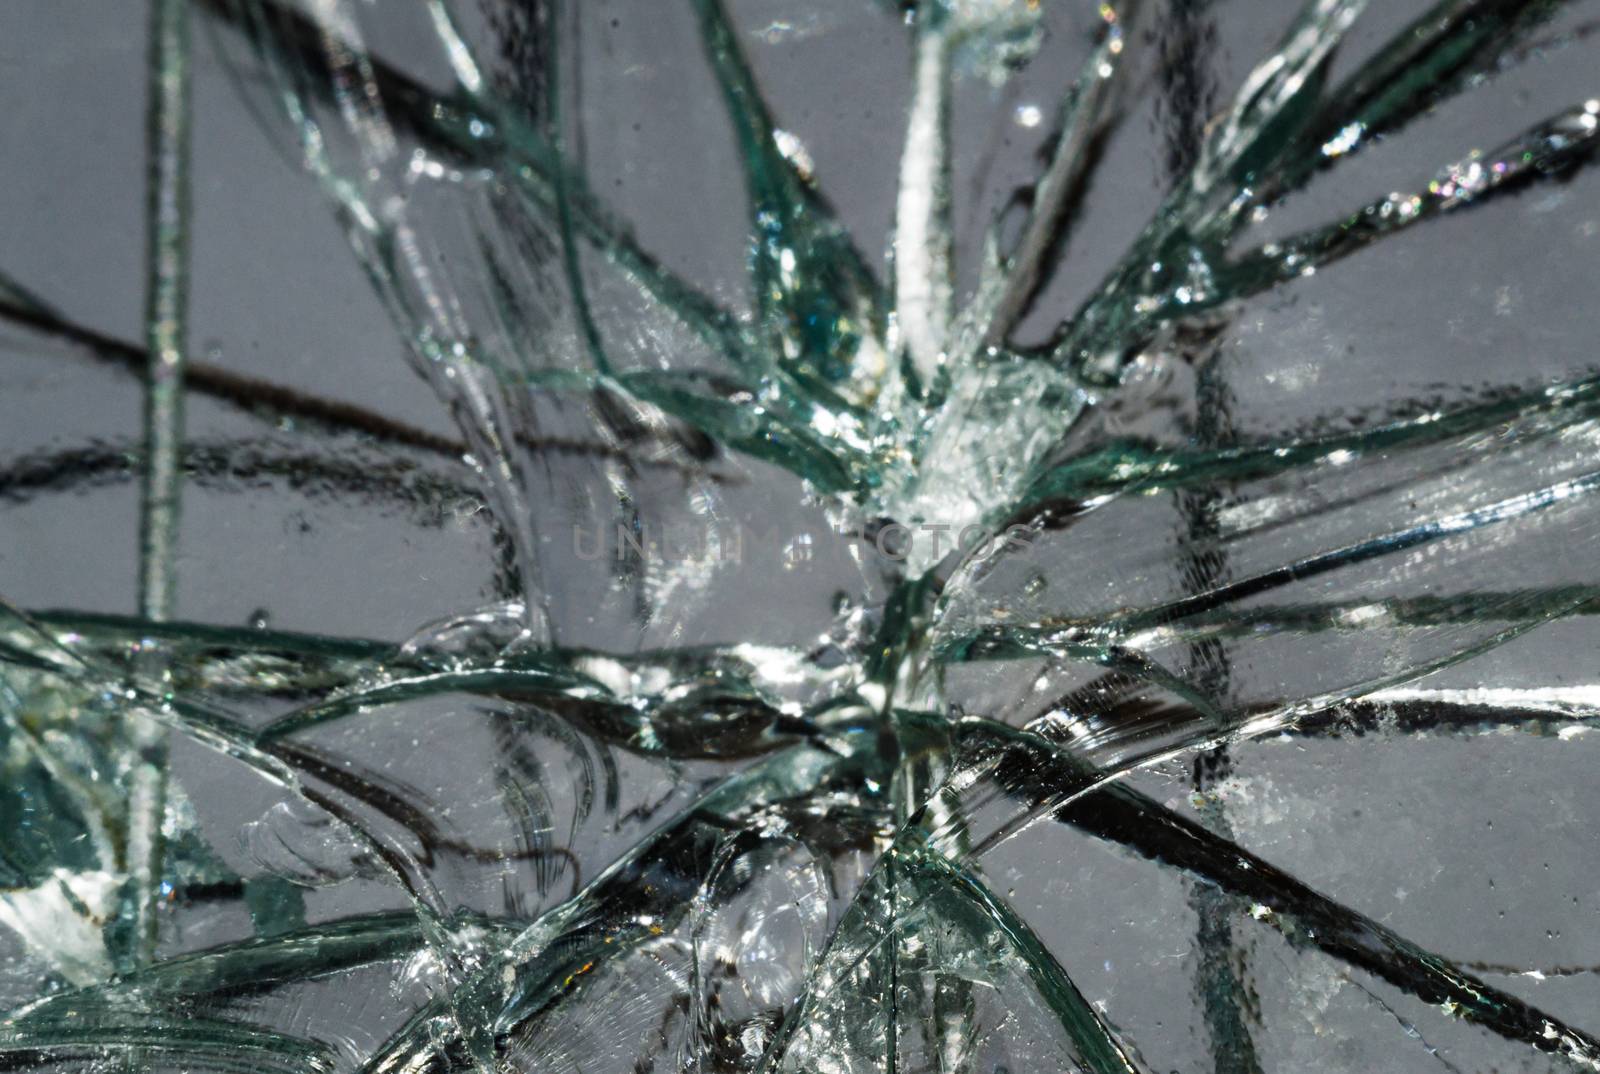 cracked glass cracked glass macro photo in the context of